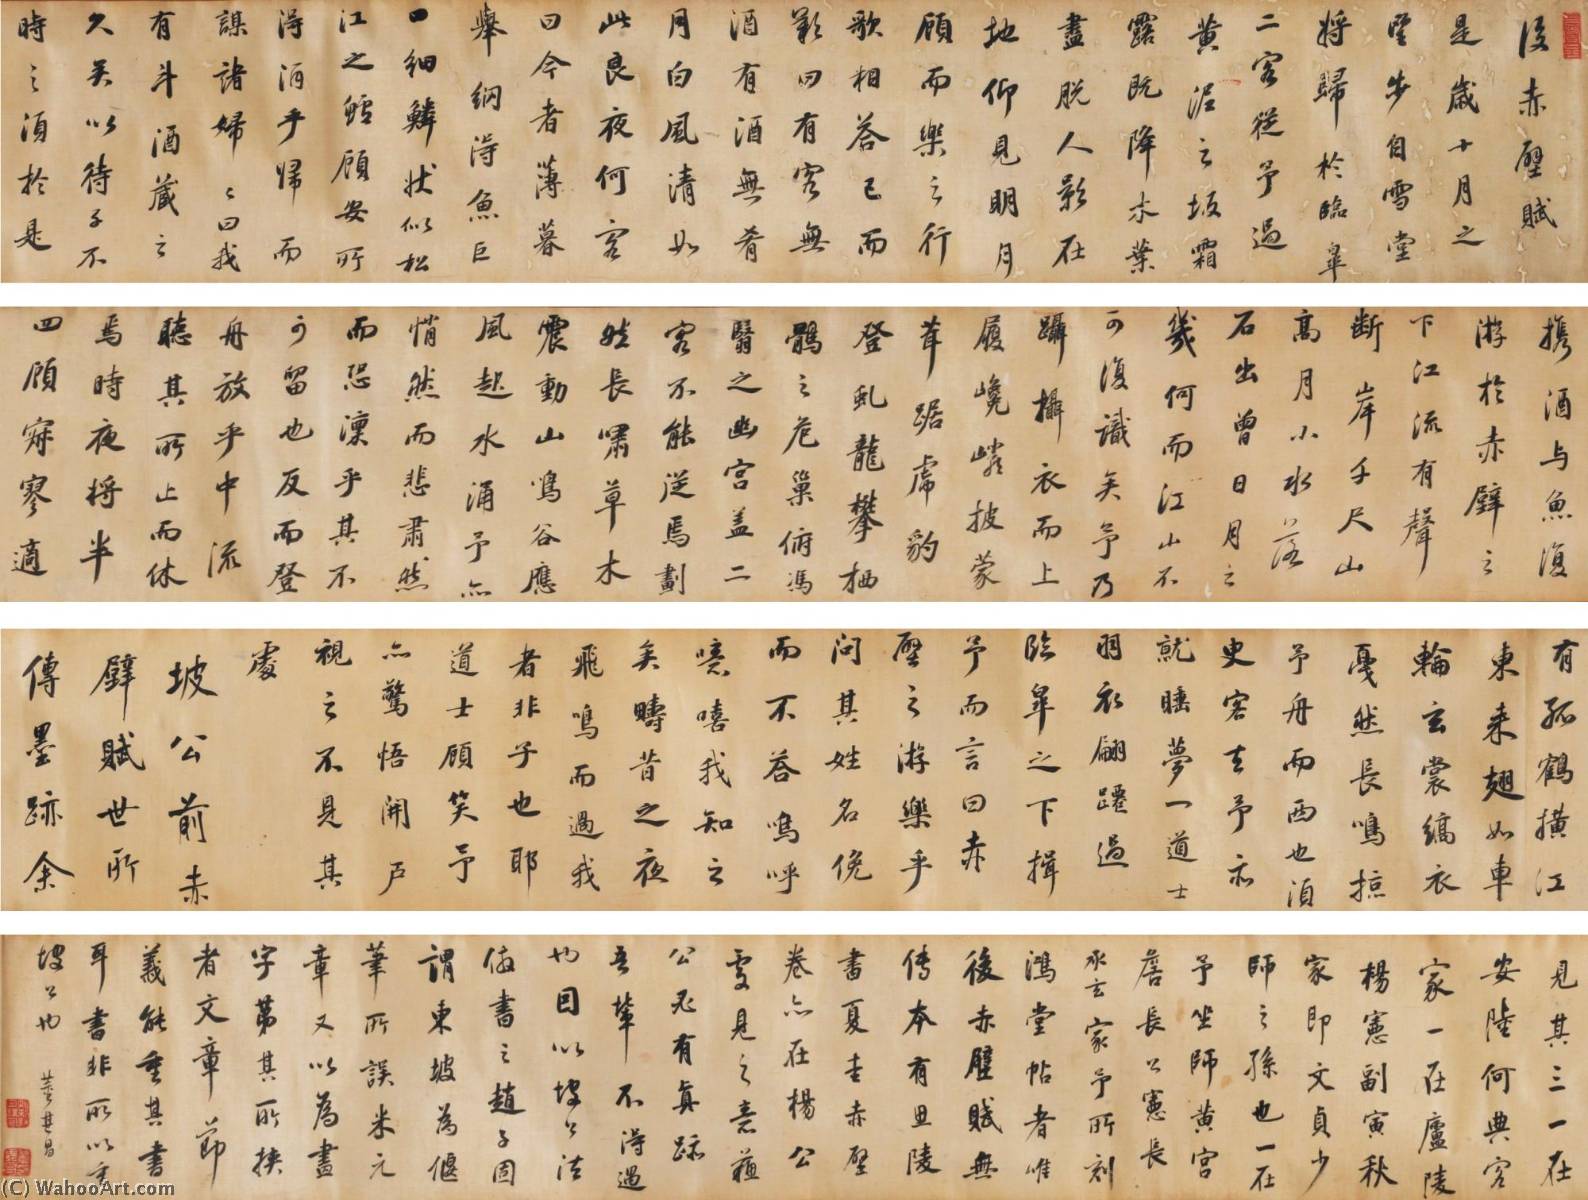 WikiOO.org - Encyclopedia of Fine Arts - Lukisan, Artwork Dong Qichang - ODE TO THE RED CLIFF IN RUNNING SCRIPT